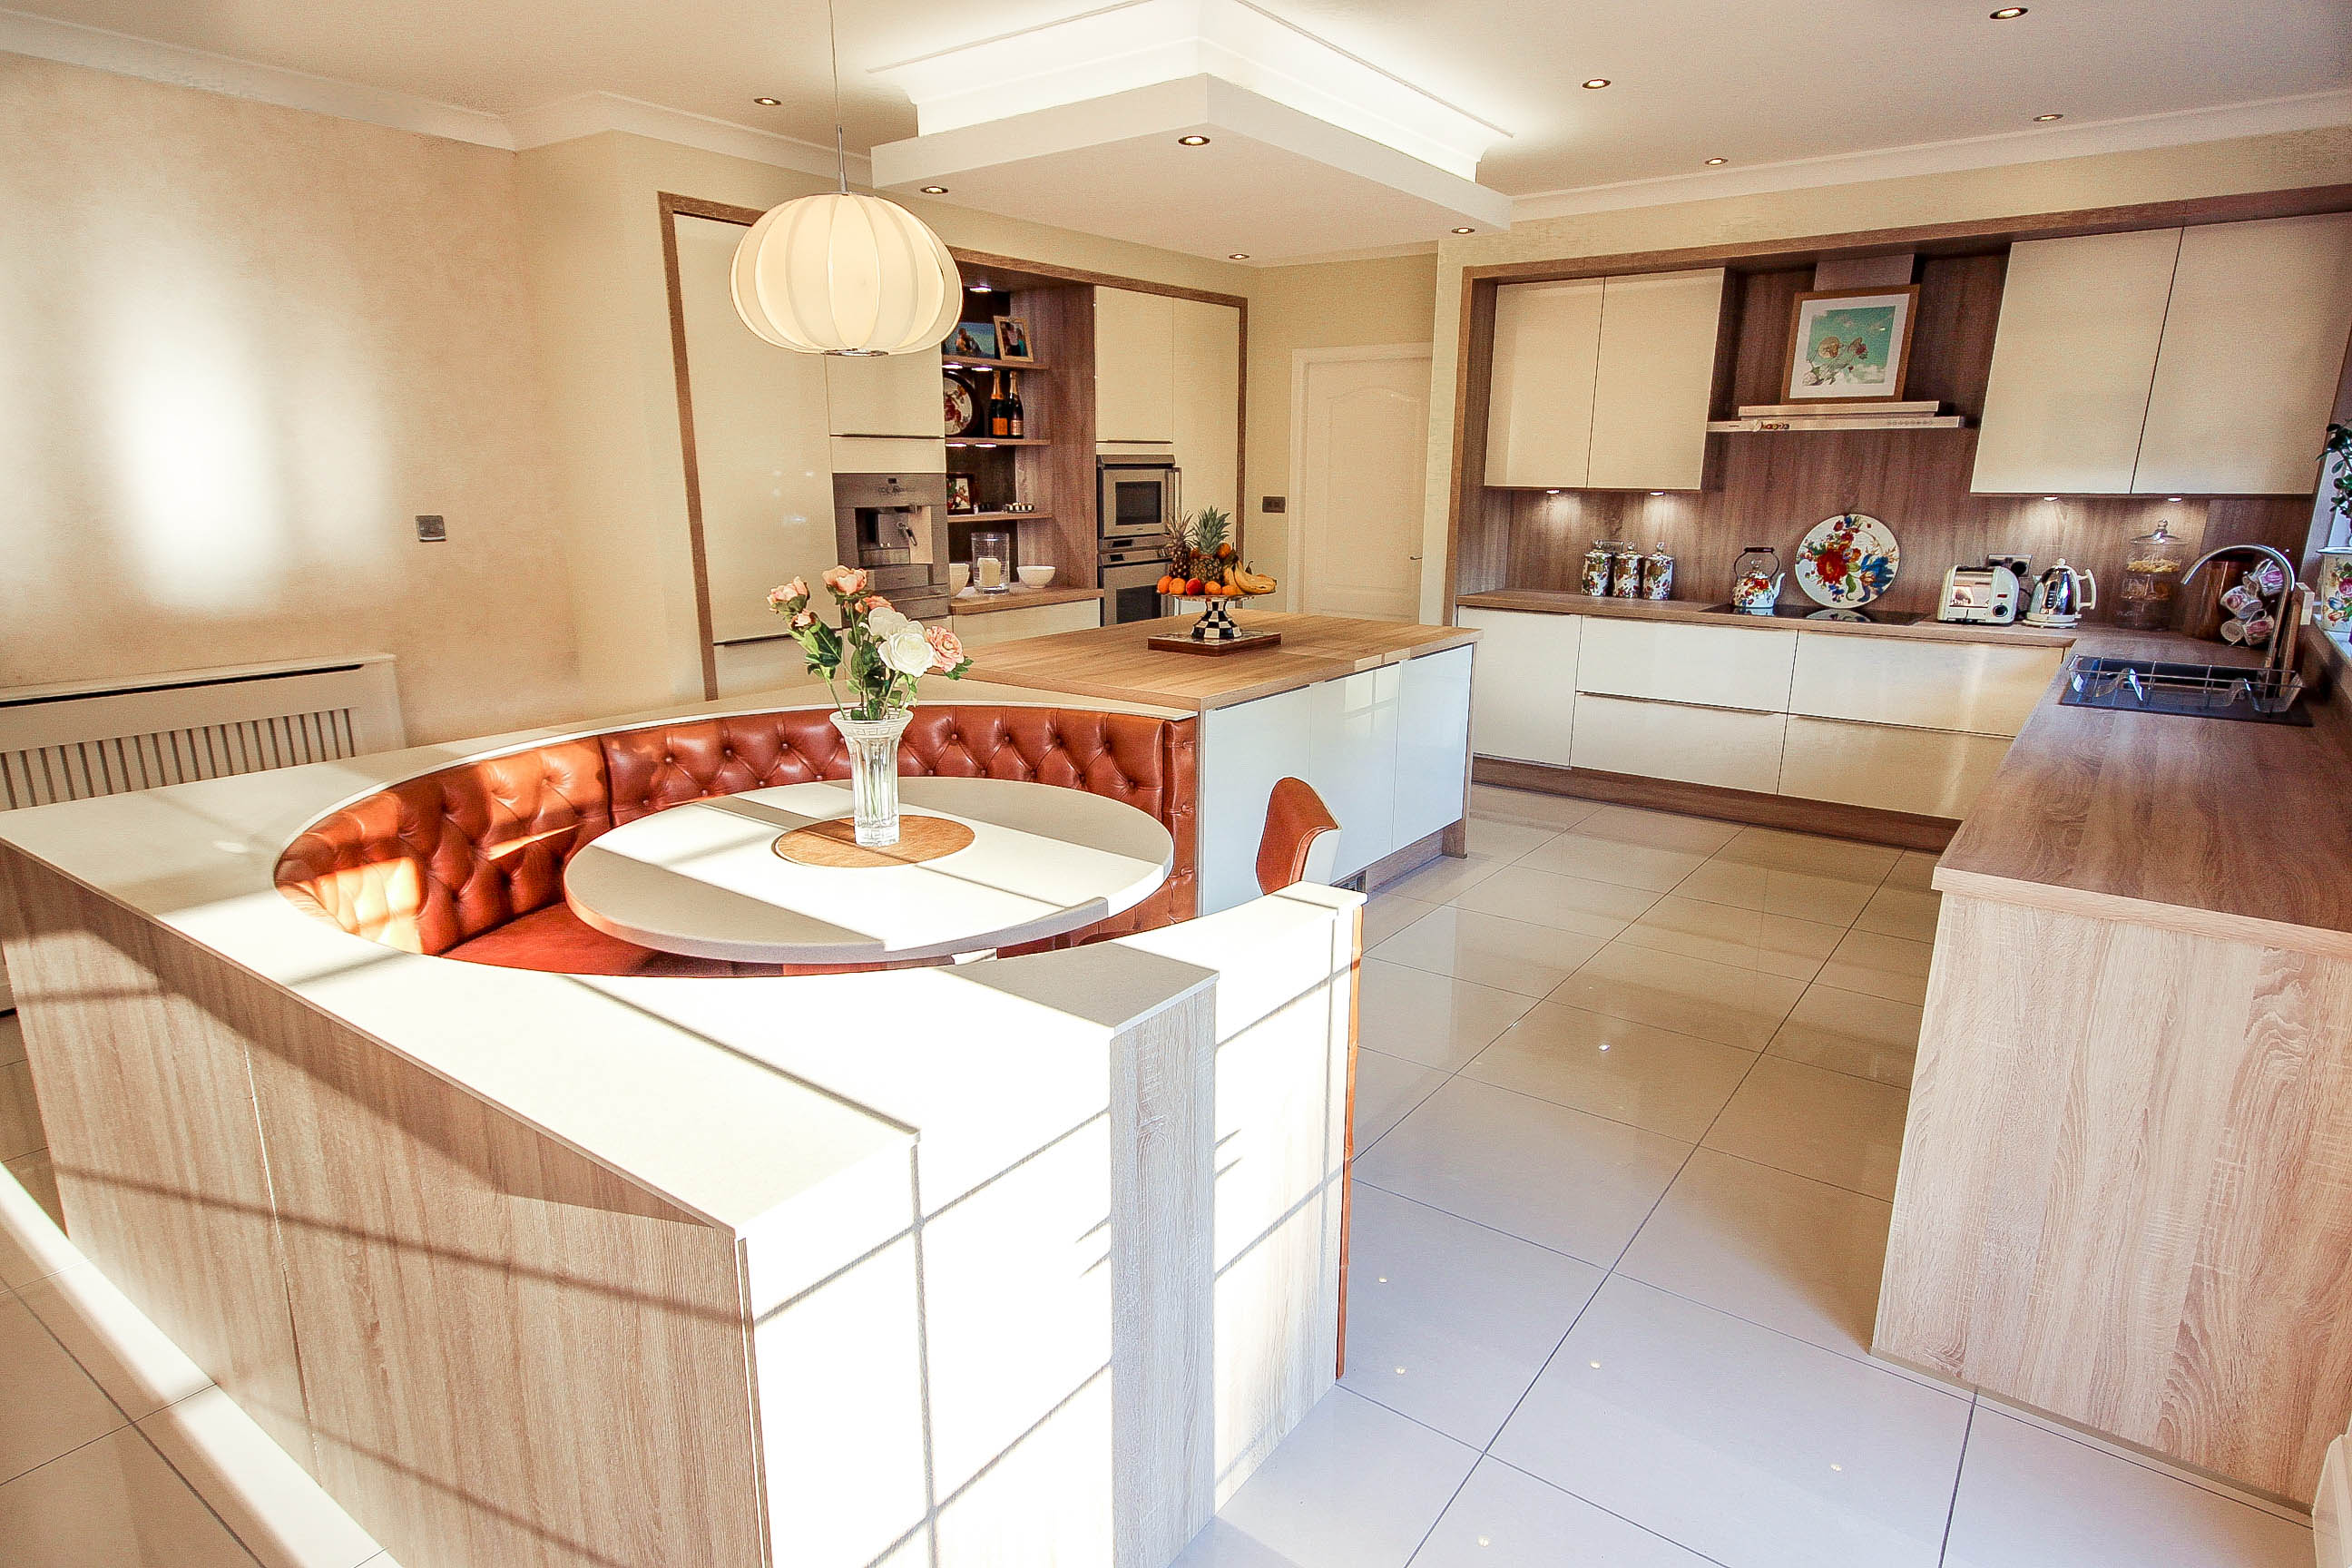 Image : Reec and Steve’s New Kitchen